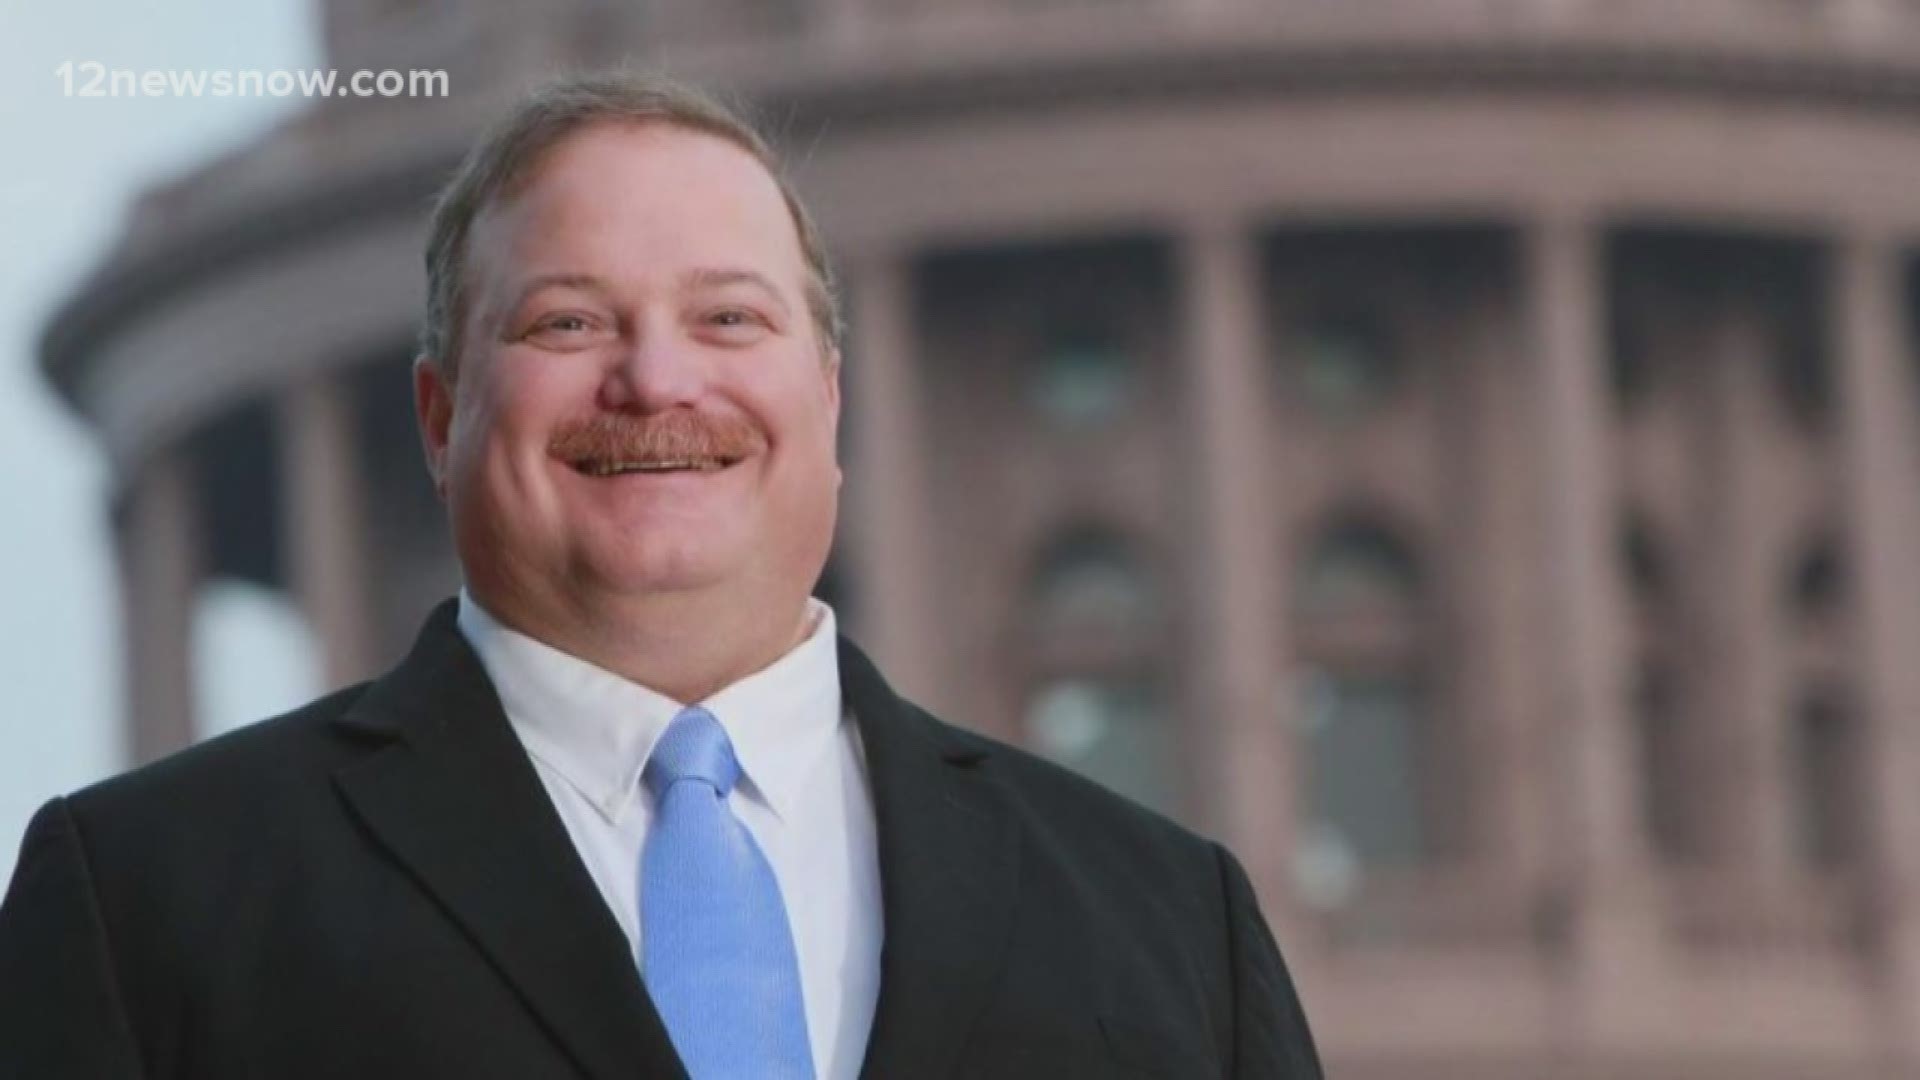 Former Texas State Representative Mike "Tuffy" Hamilton has died after complications from a heart attack. He was 58.